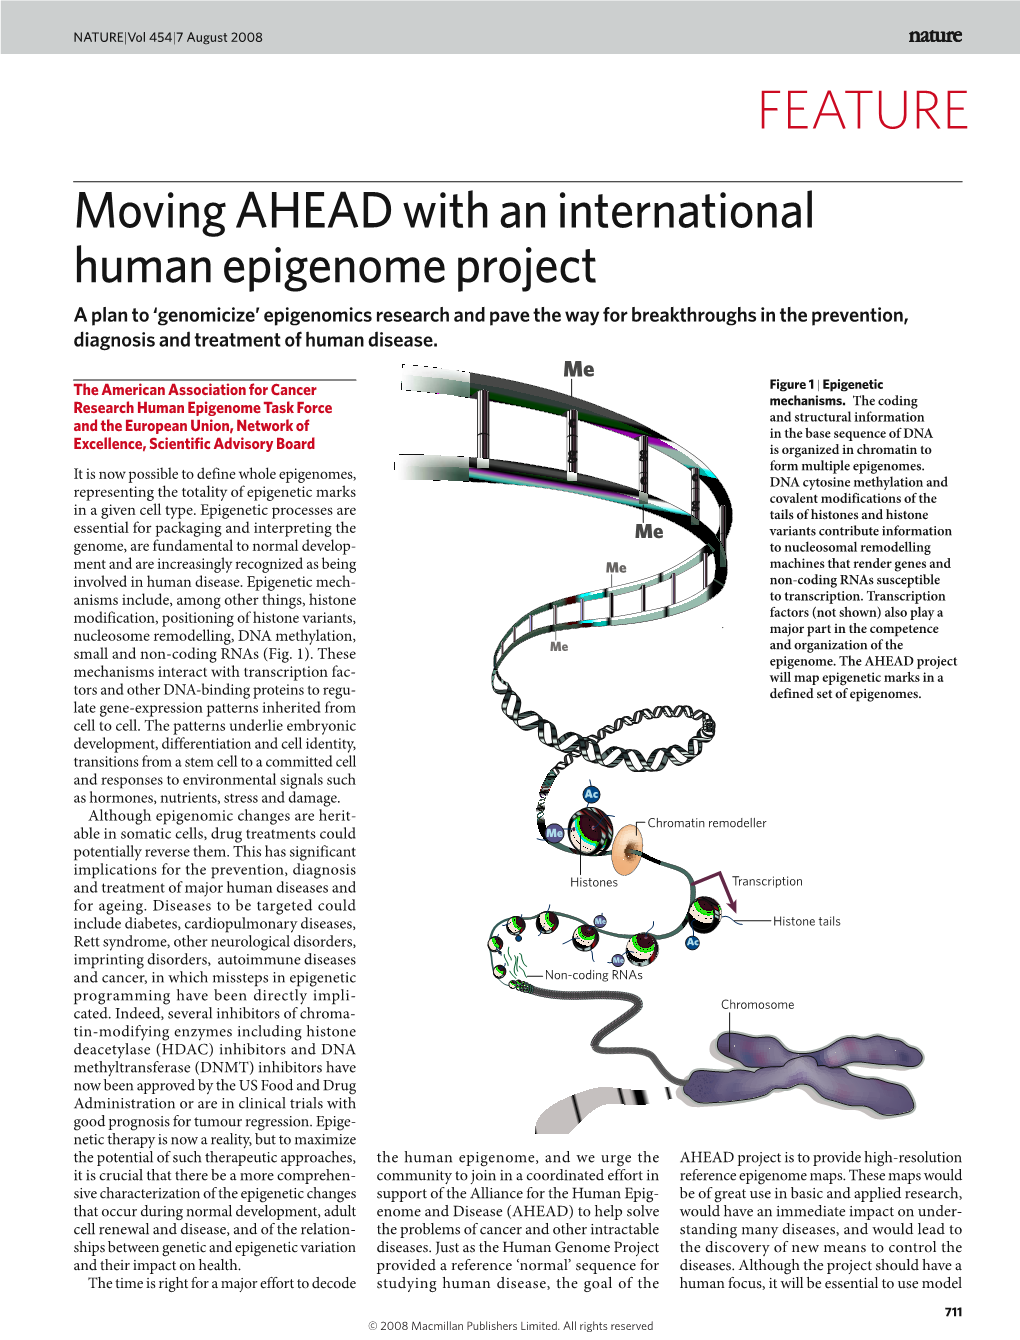 Moving Ahead with an International Human Epigenome Project